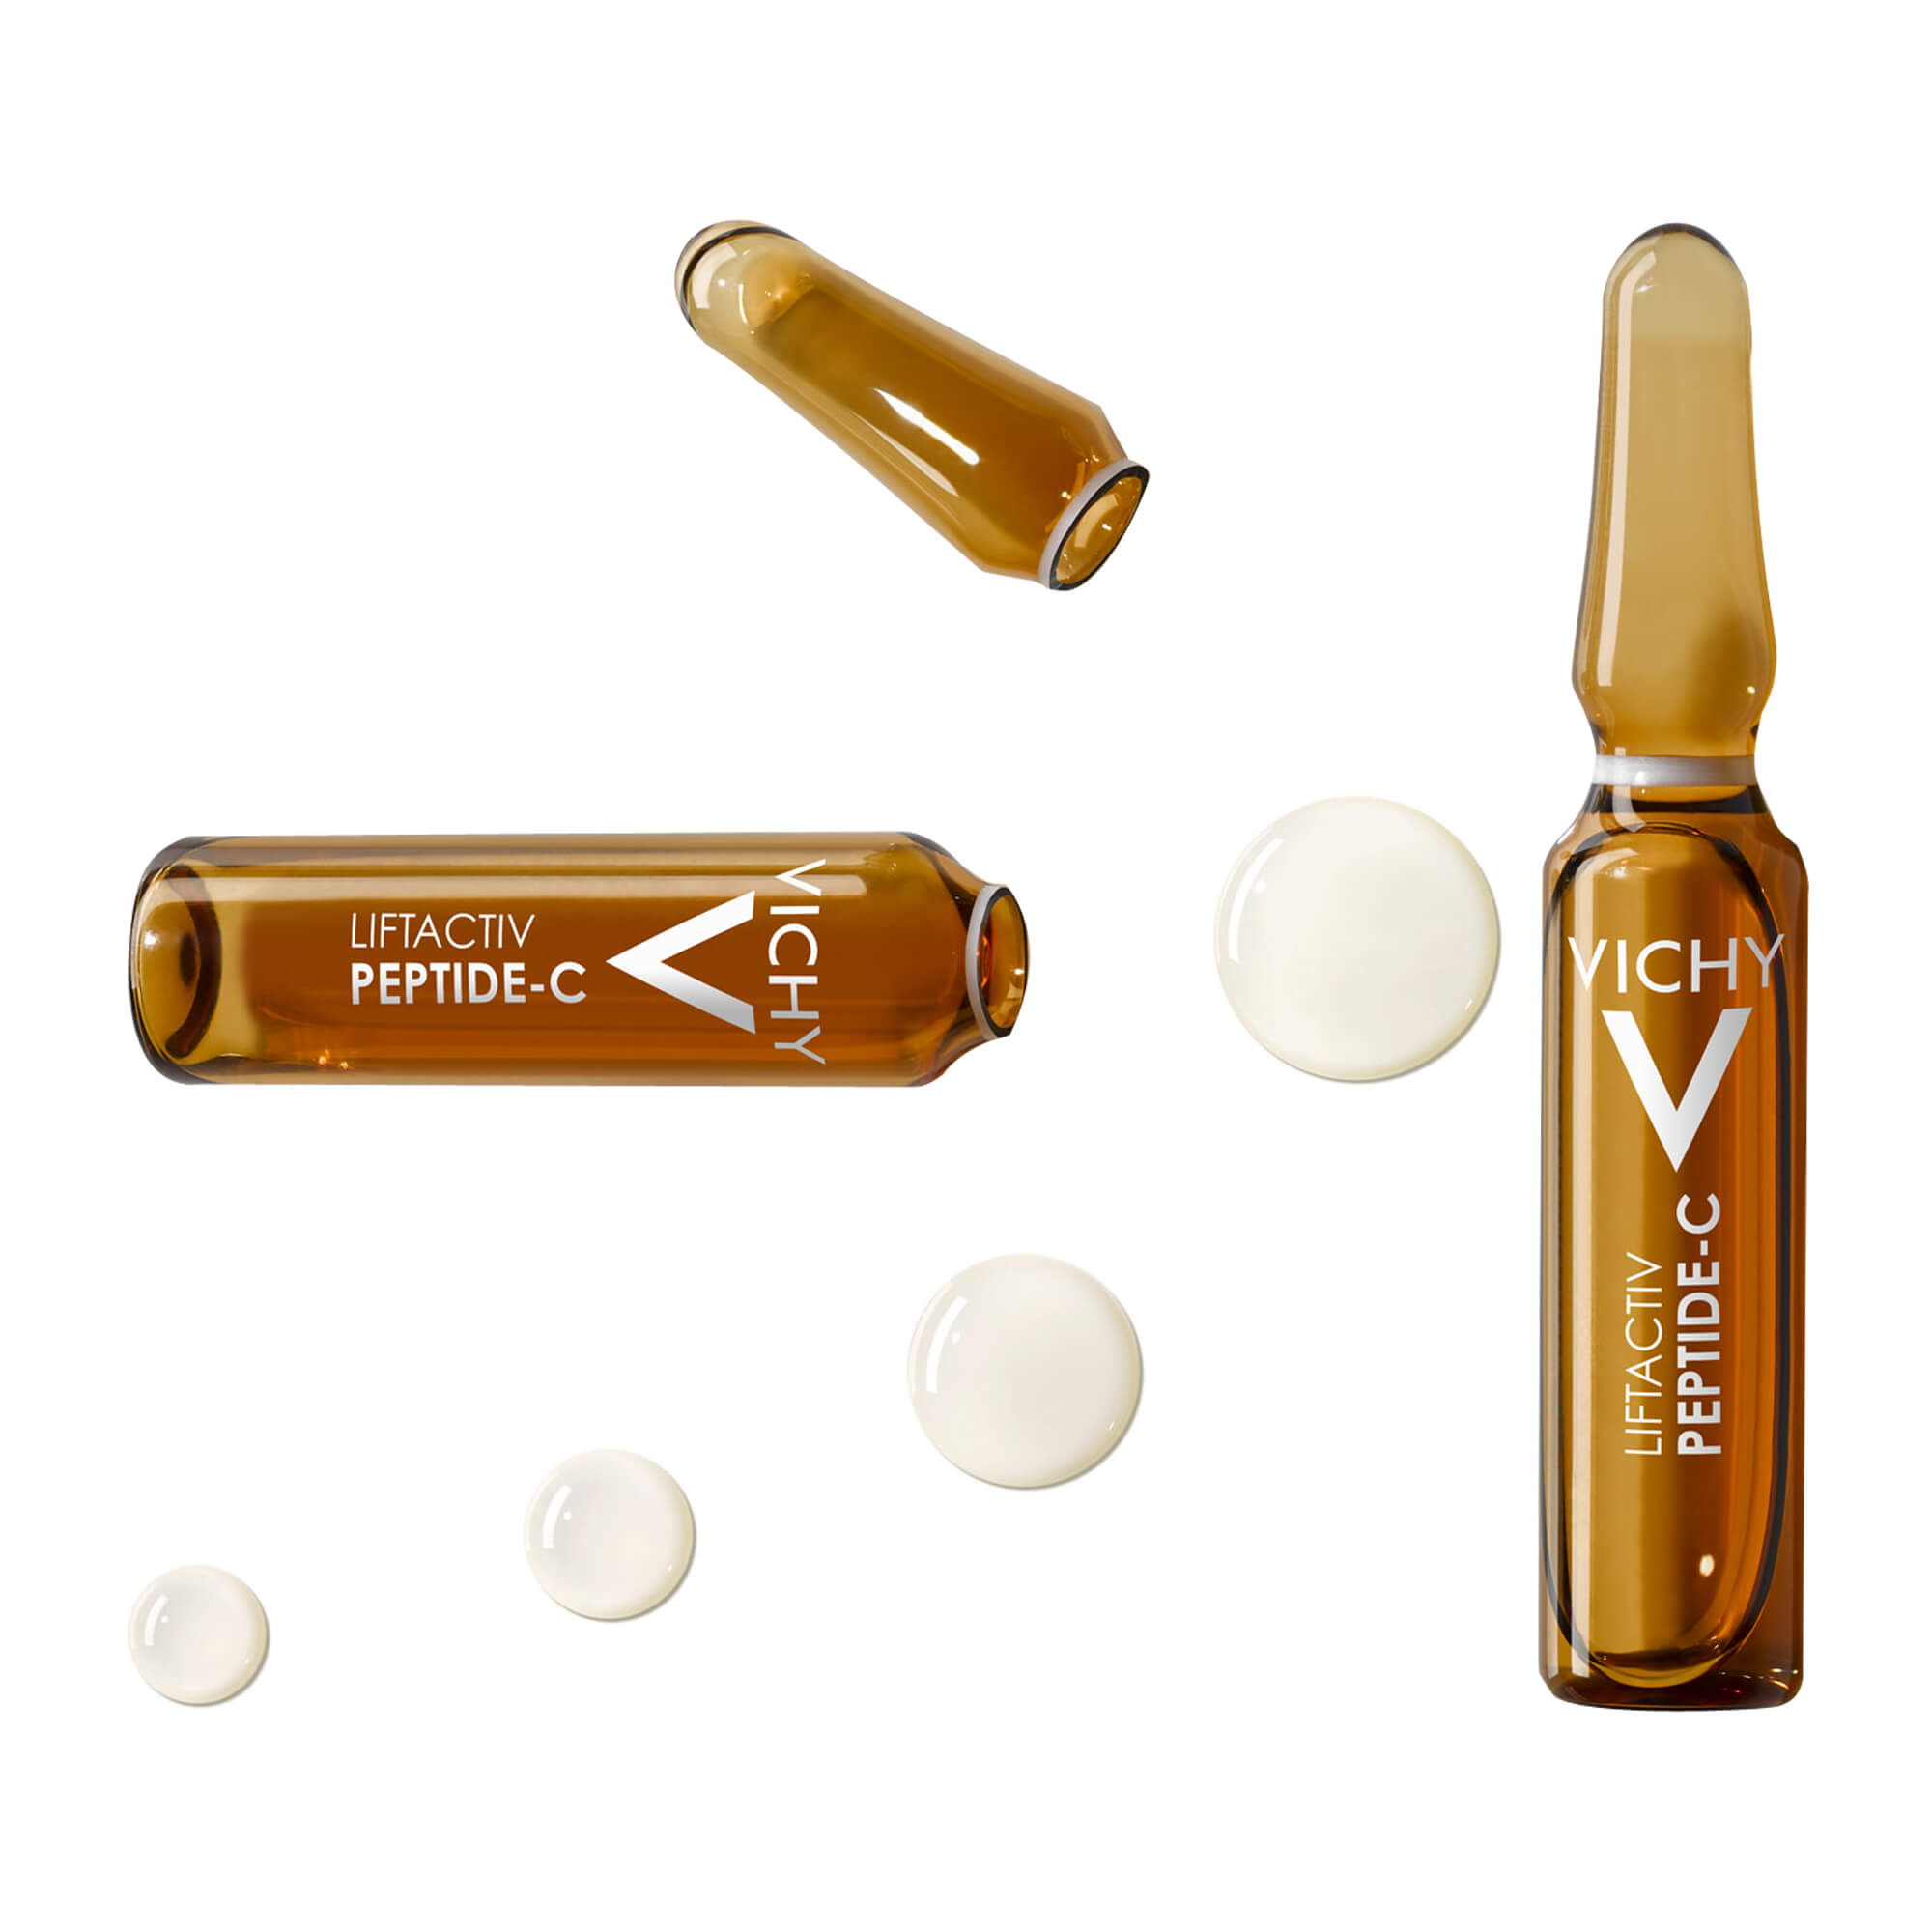 Vichy Liftactiv Specialist Peptide-C Anti-Aging Ampullen